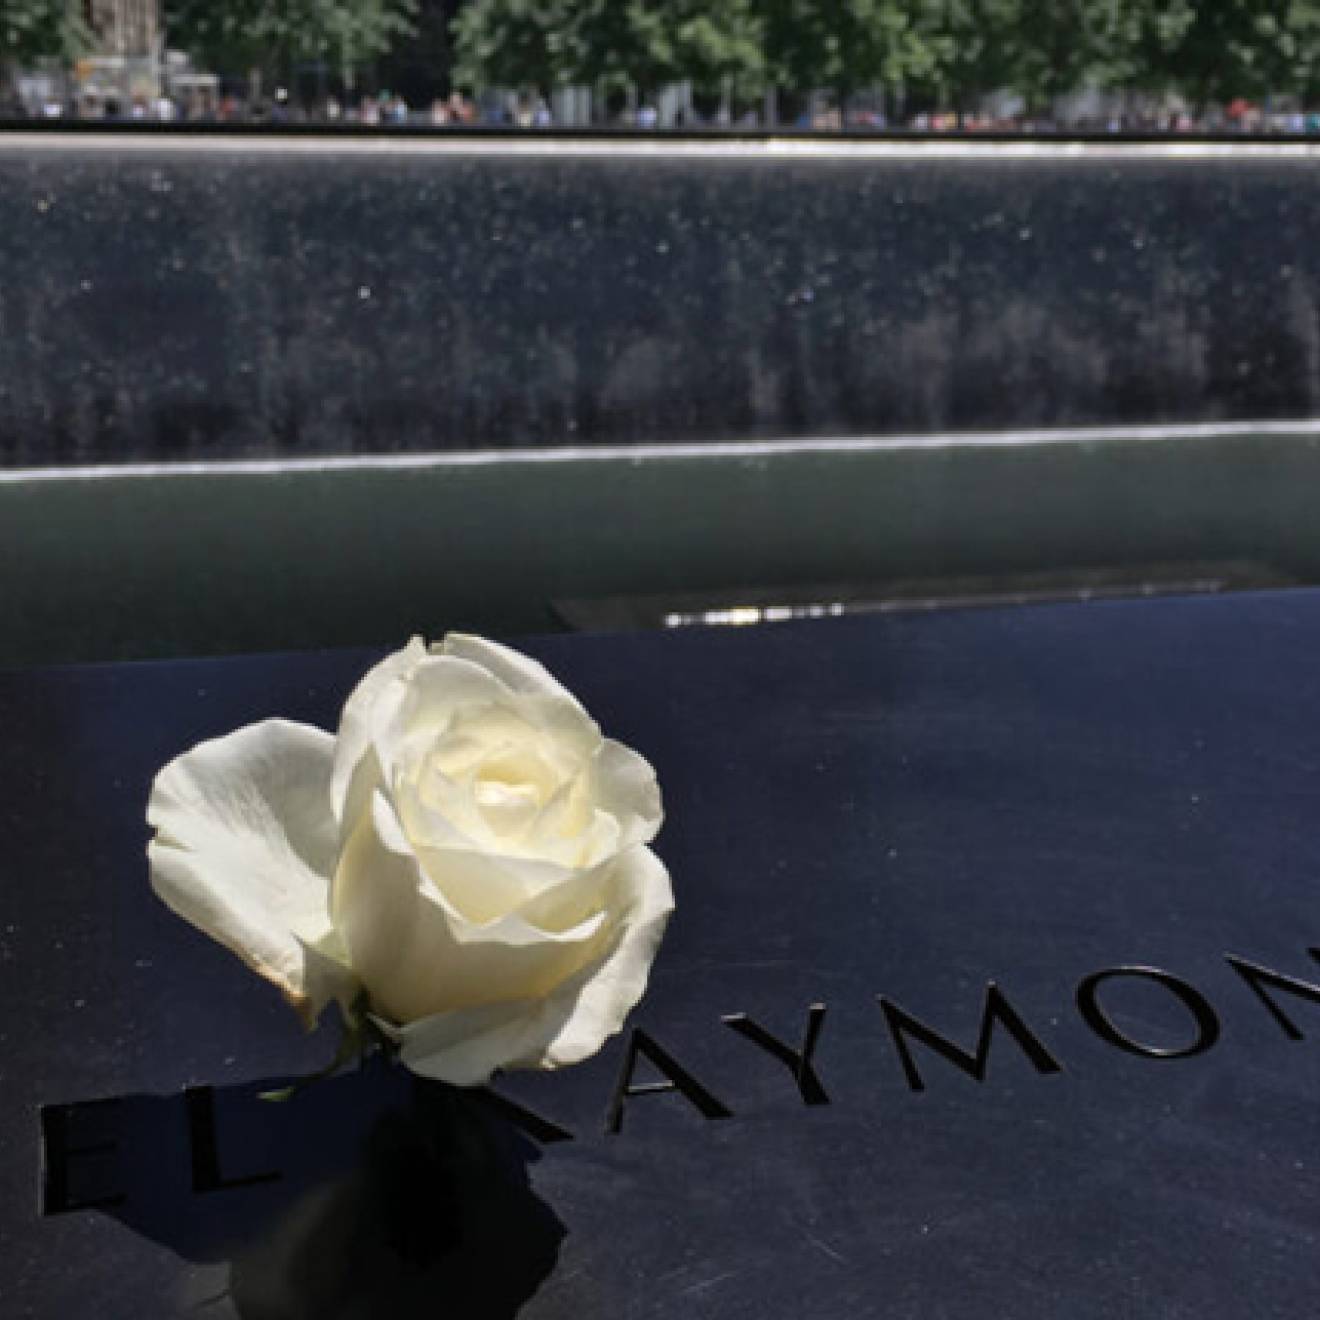 9/11 memorial with a white rose